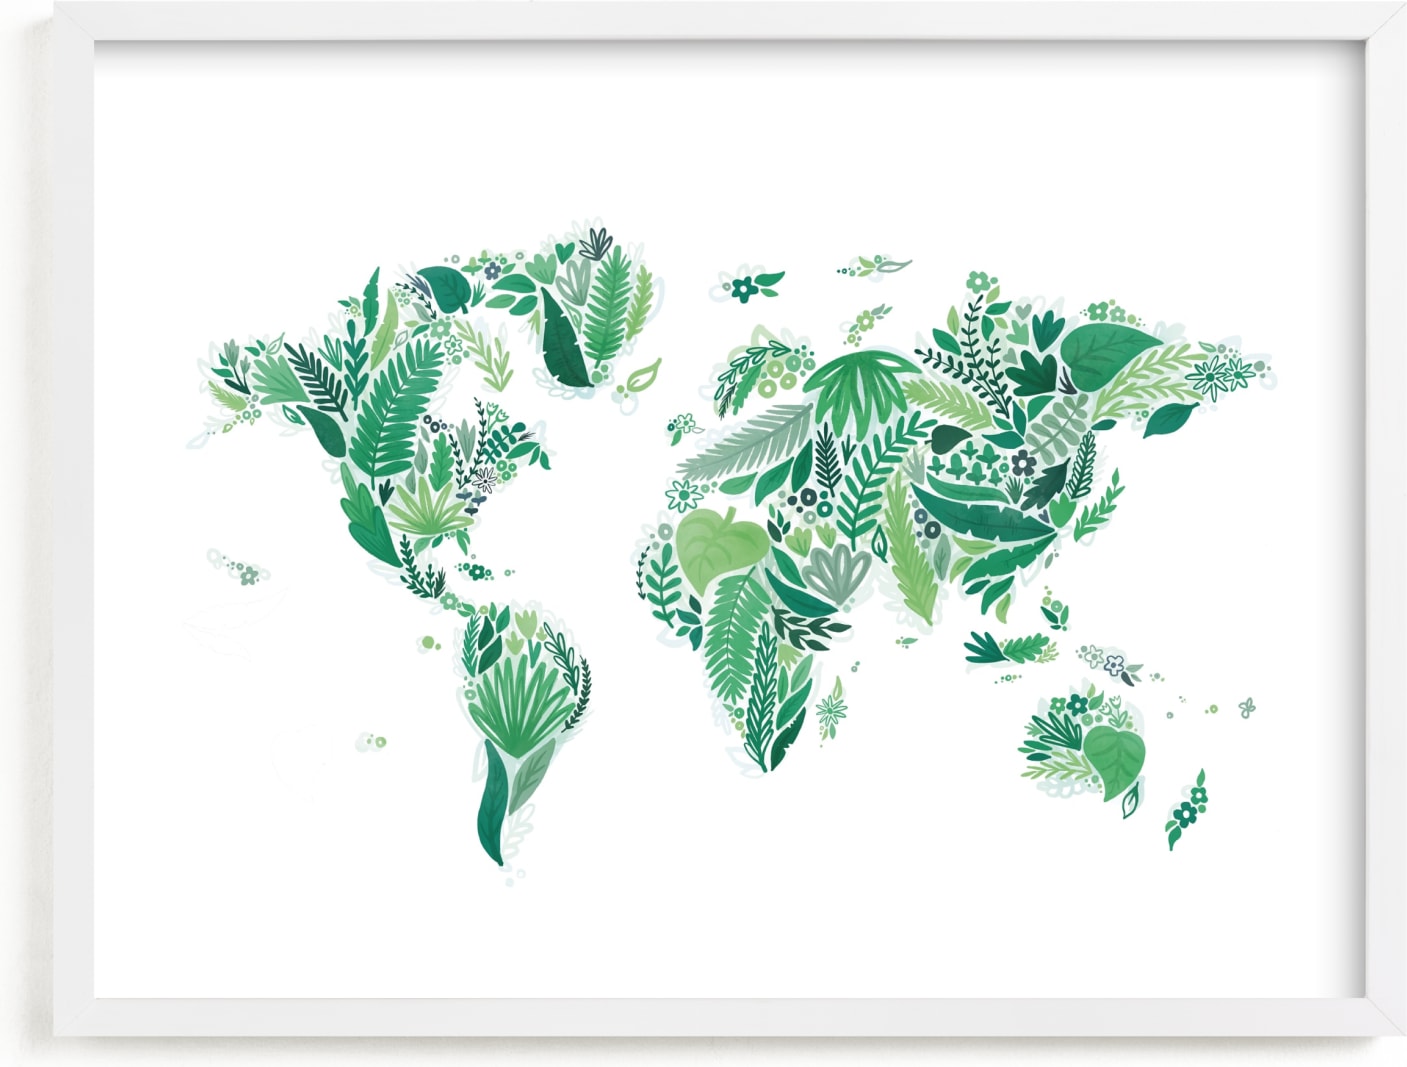 This is a white kids wall art by Jessie Steury called Botanical World Map.